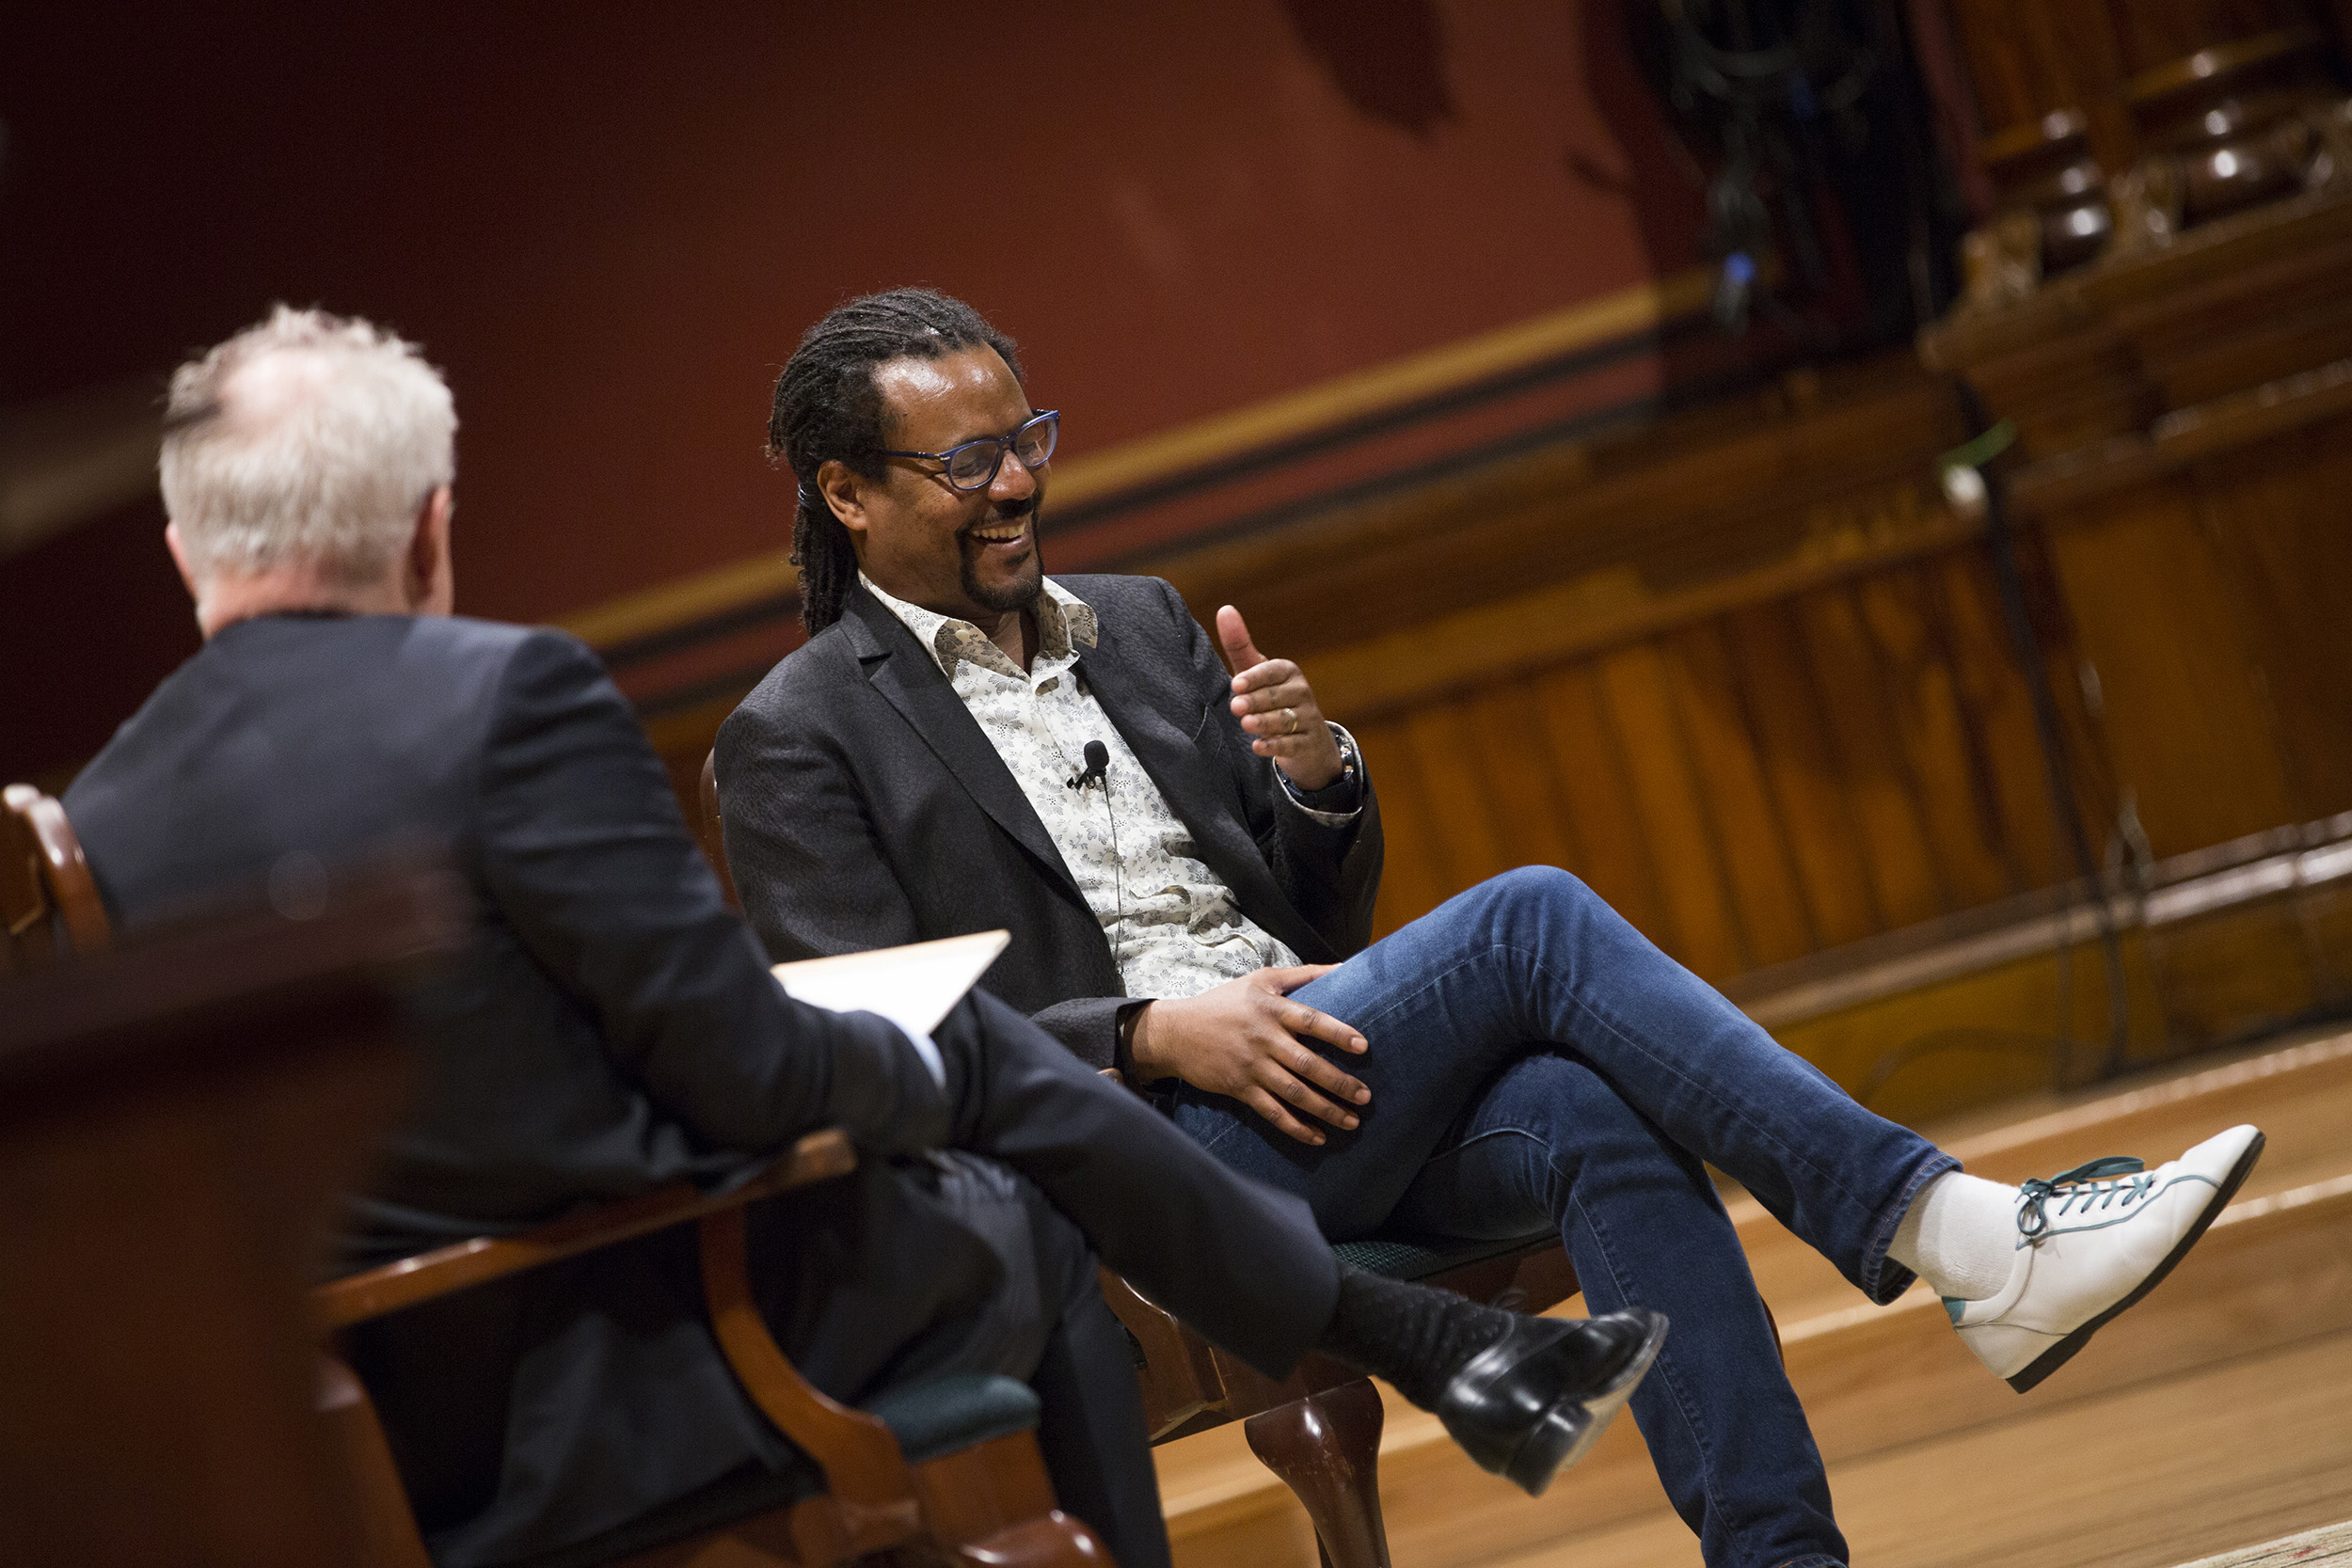 Colson Whitehead laughs with John Lithgow